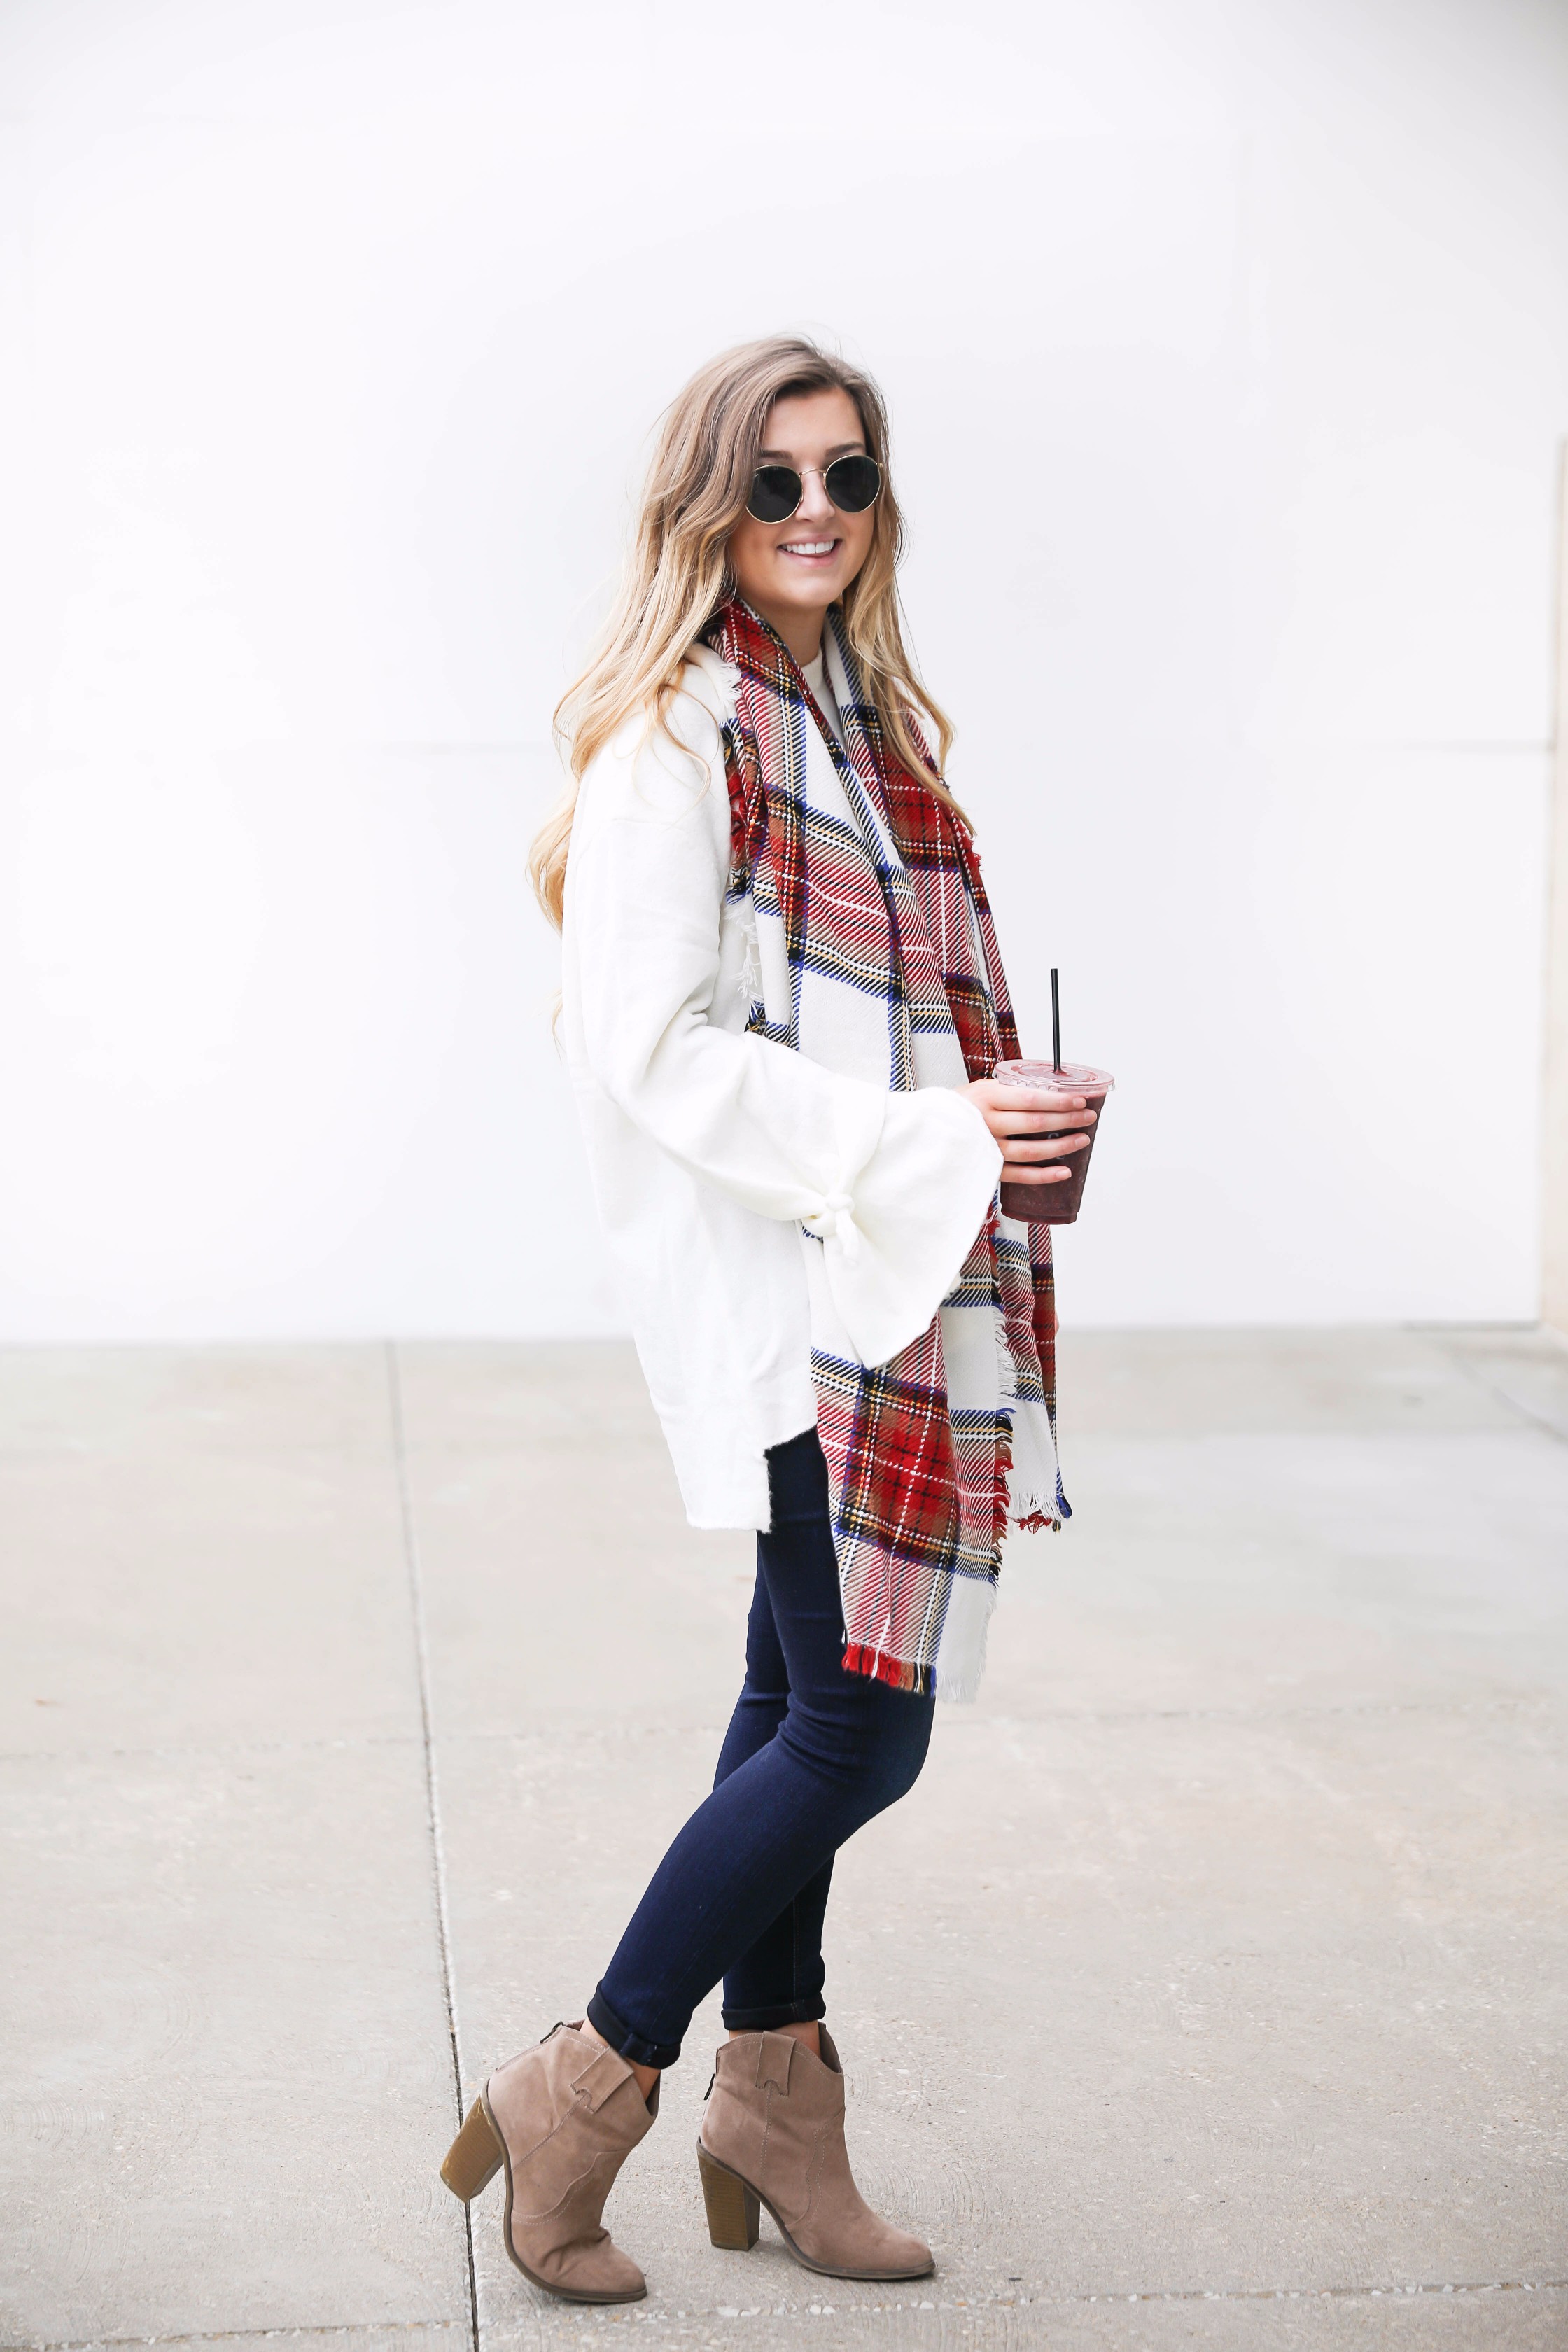 Tied bow sleeve sweater with a plaid blanket scarf! I love blanket scarves for fall. This outfit is perfect with dark jeans and booties! Details on fashion blog daily dose of charm by lauren lindmark